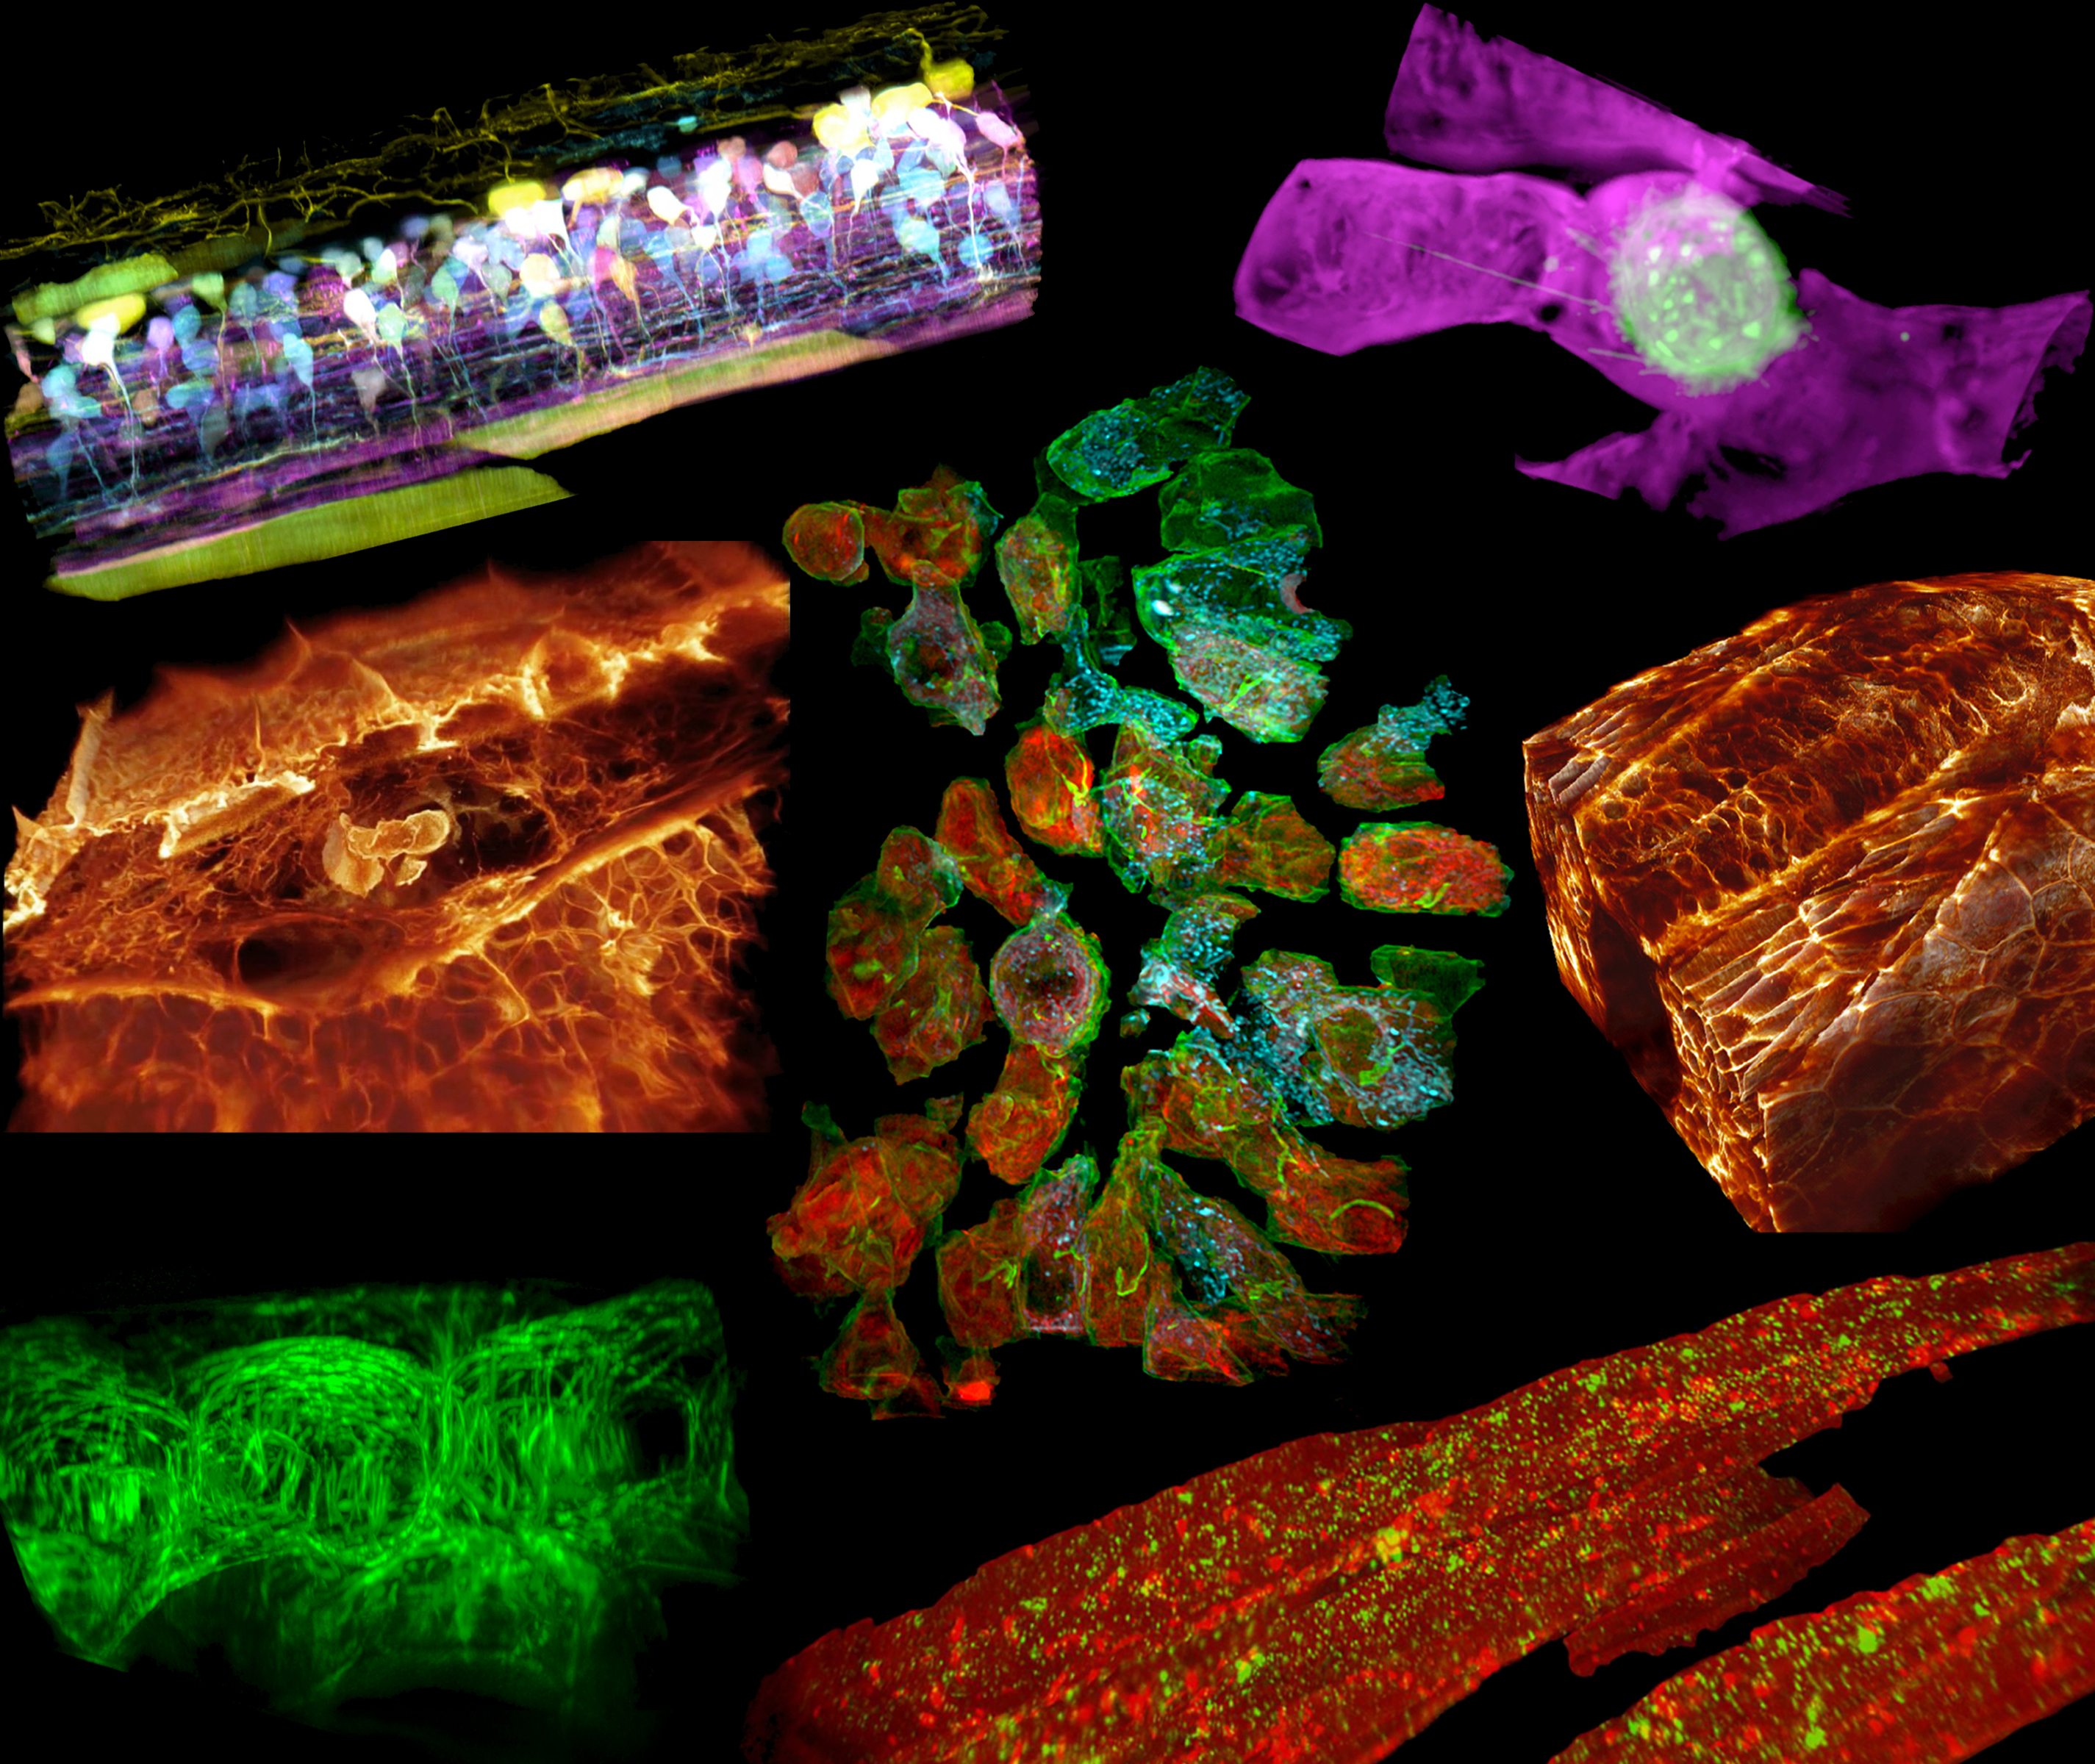 Organisms captured by a microscope